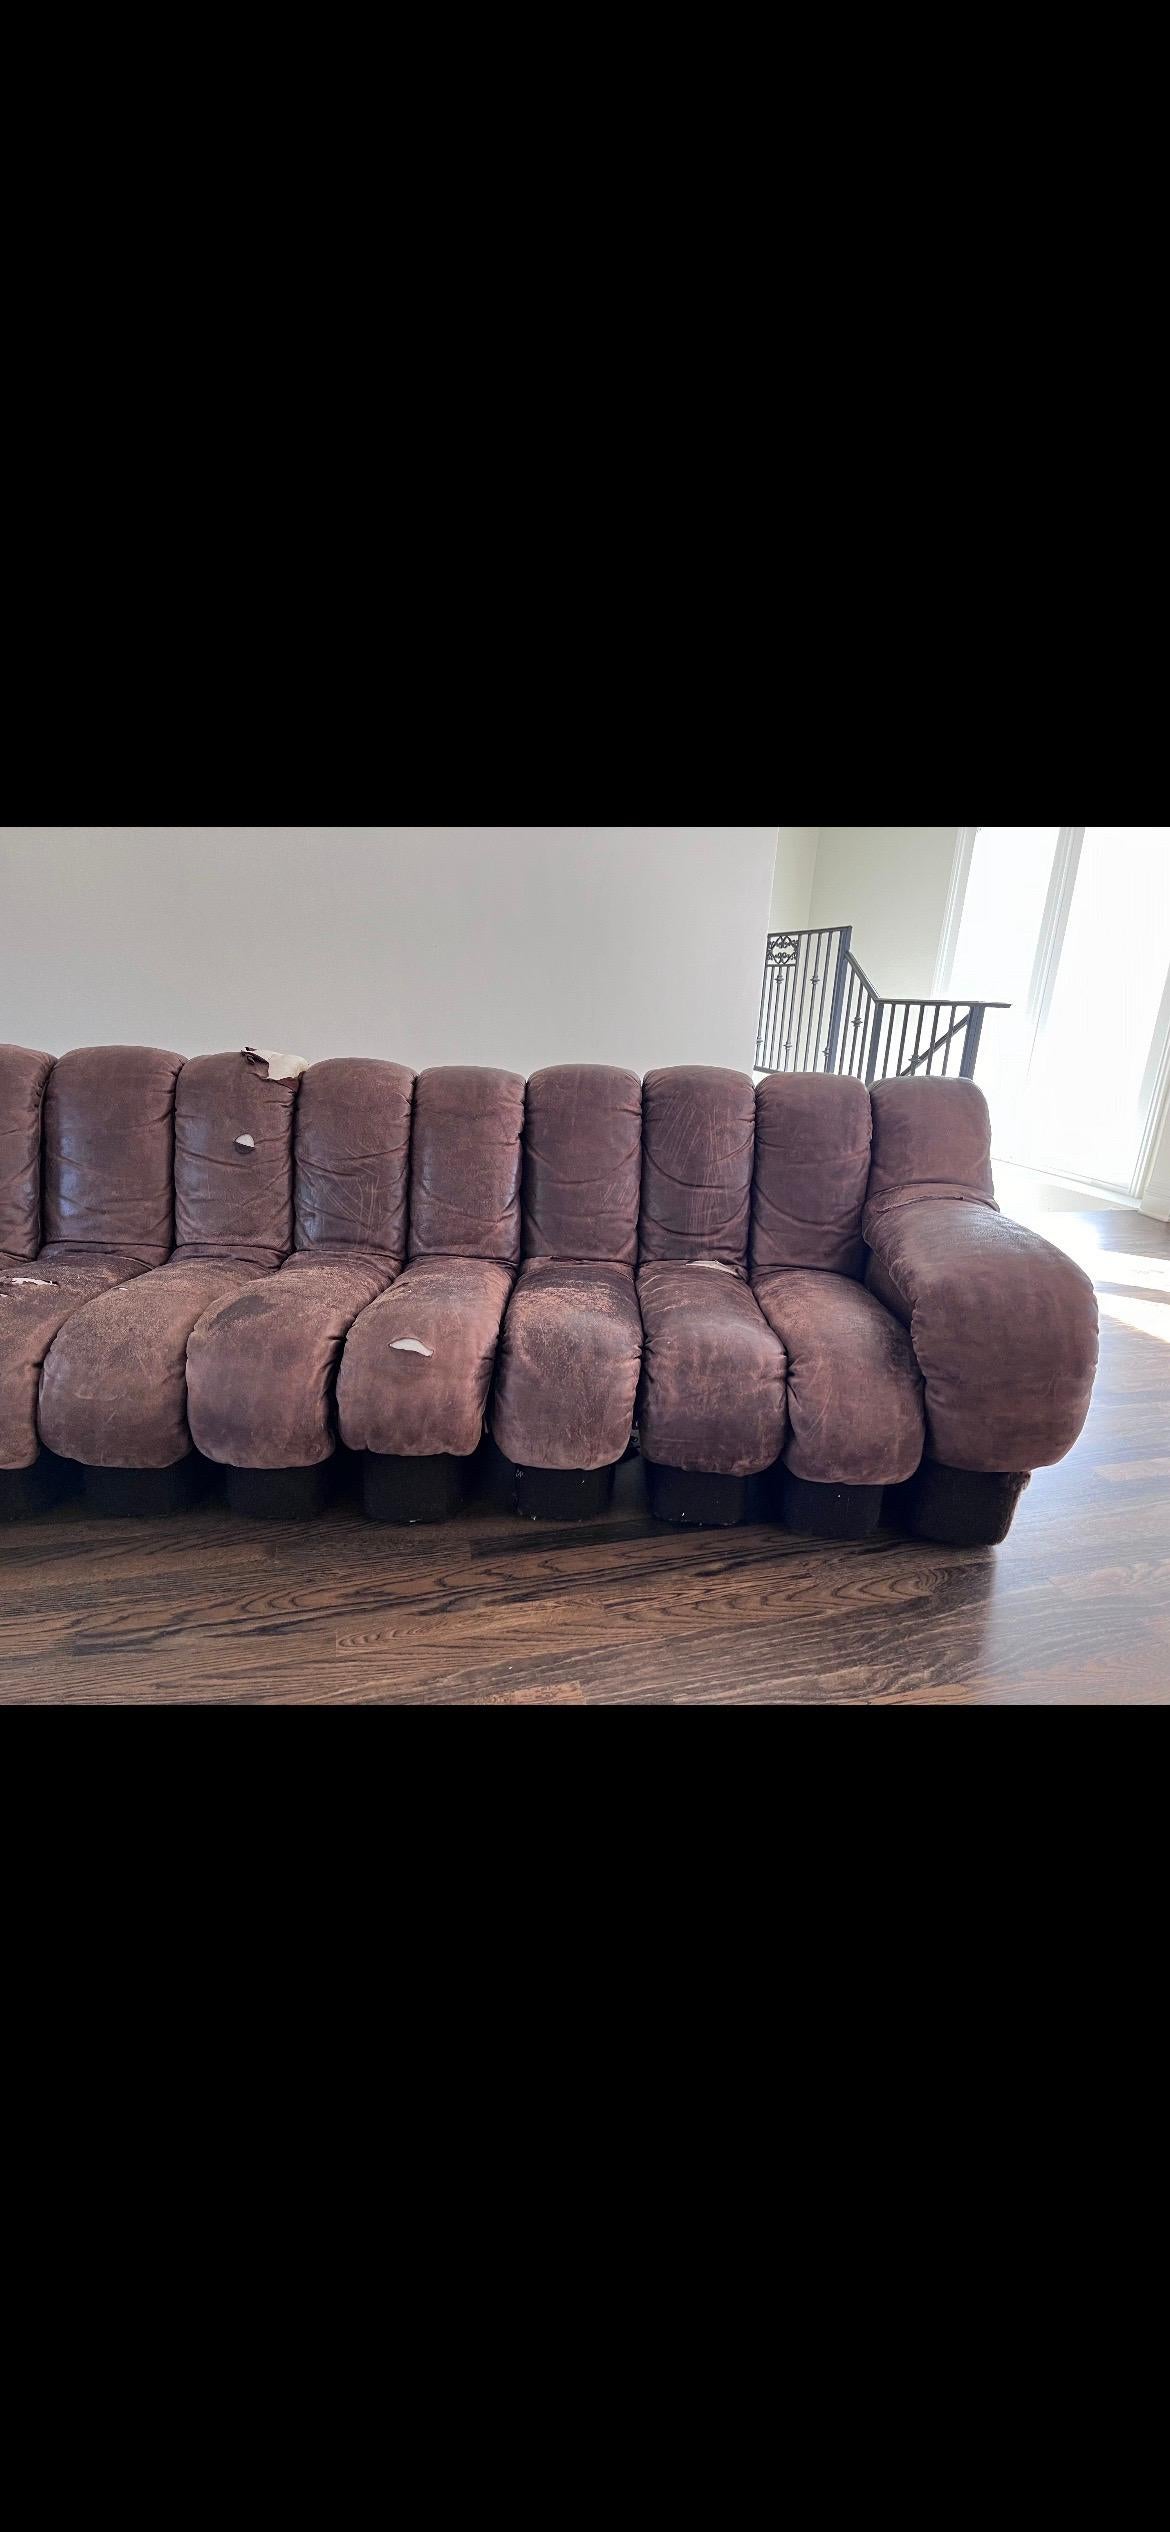 De Sede 600 non stop chocolate brown 18 element sofa, 1970s

Beautiful distressed chocolate brown sofa by De Sede. This item needs to be reupholstered. There are approx 6-8 leather parts that need to be redone. 18 elements.